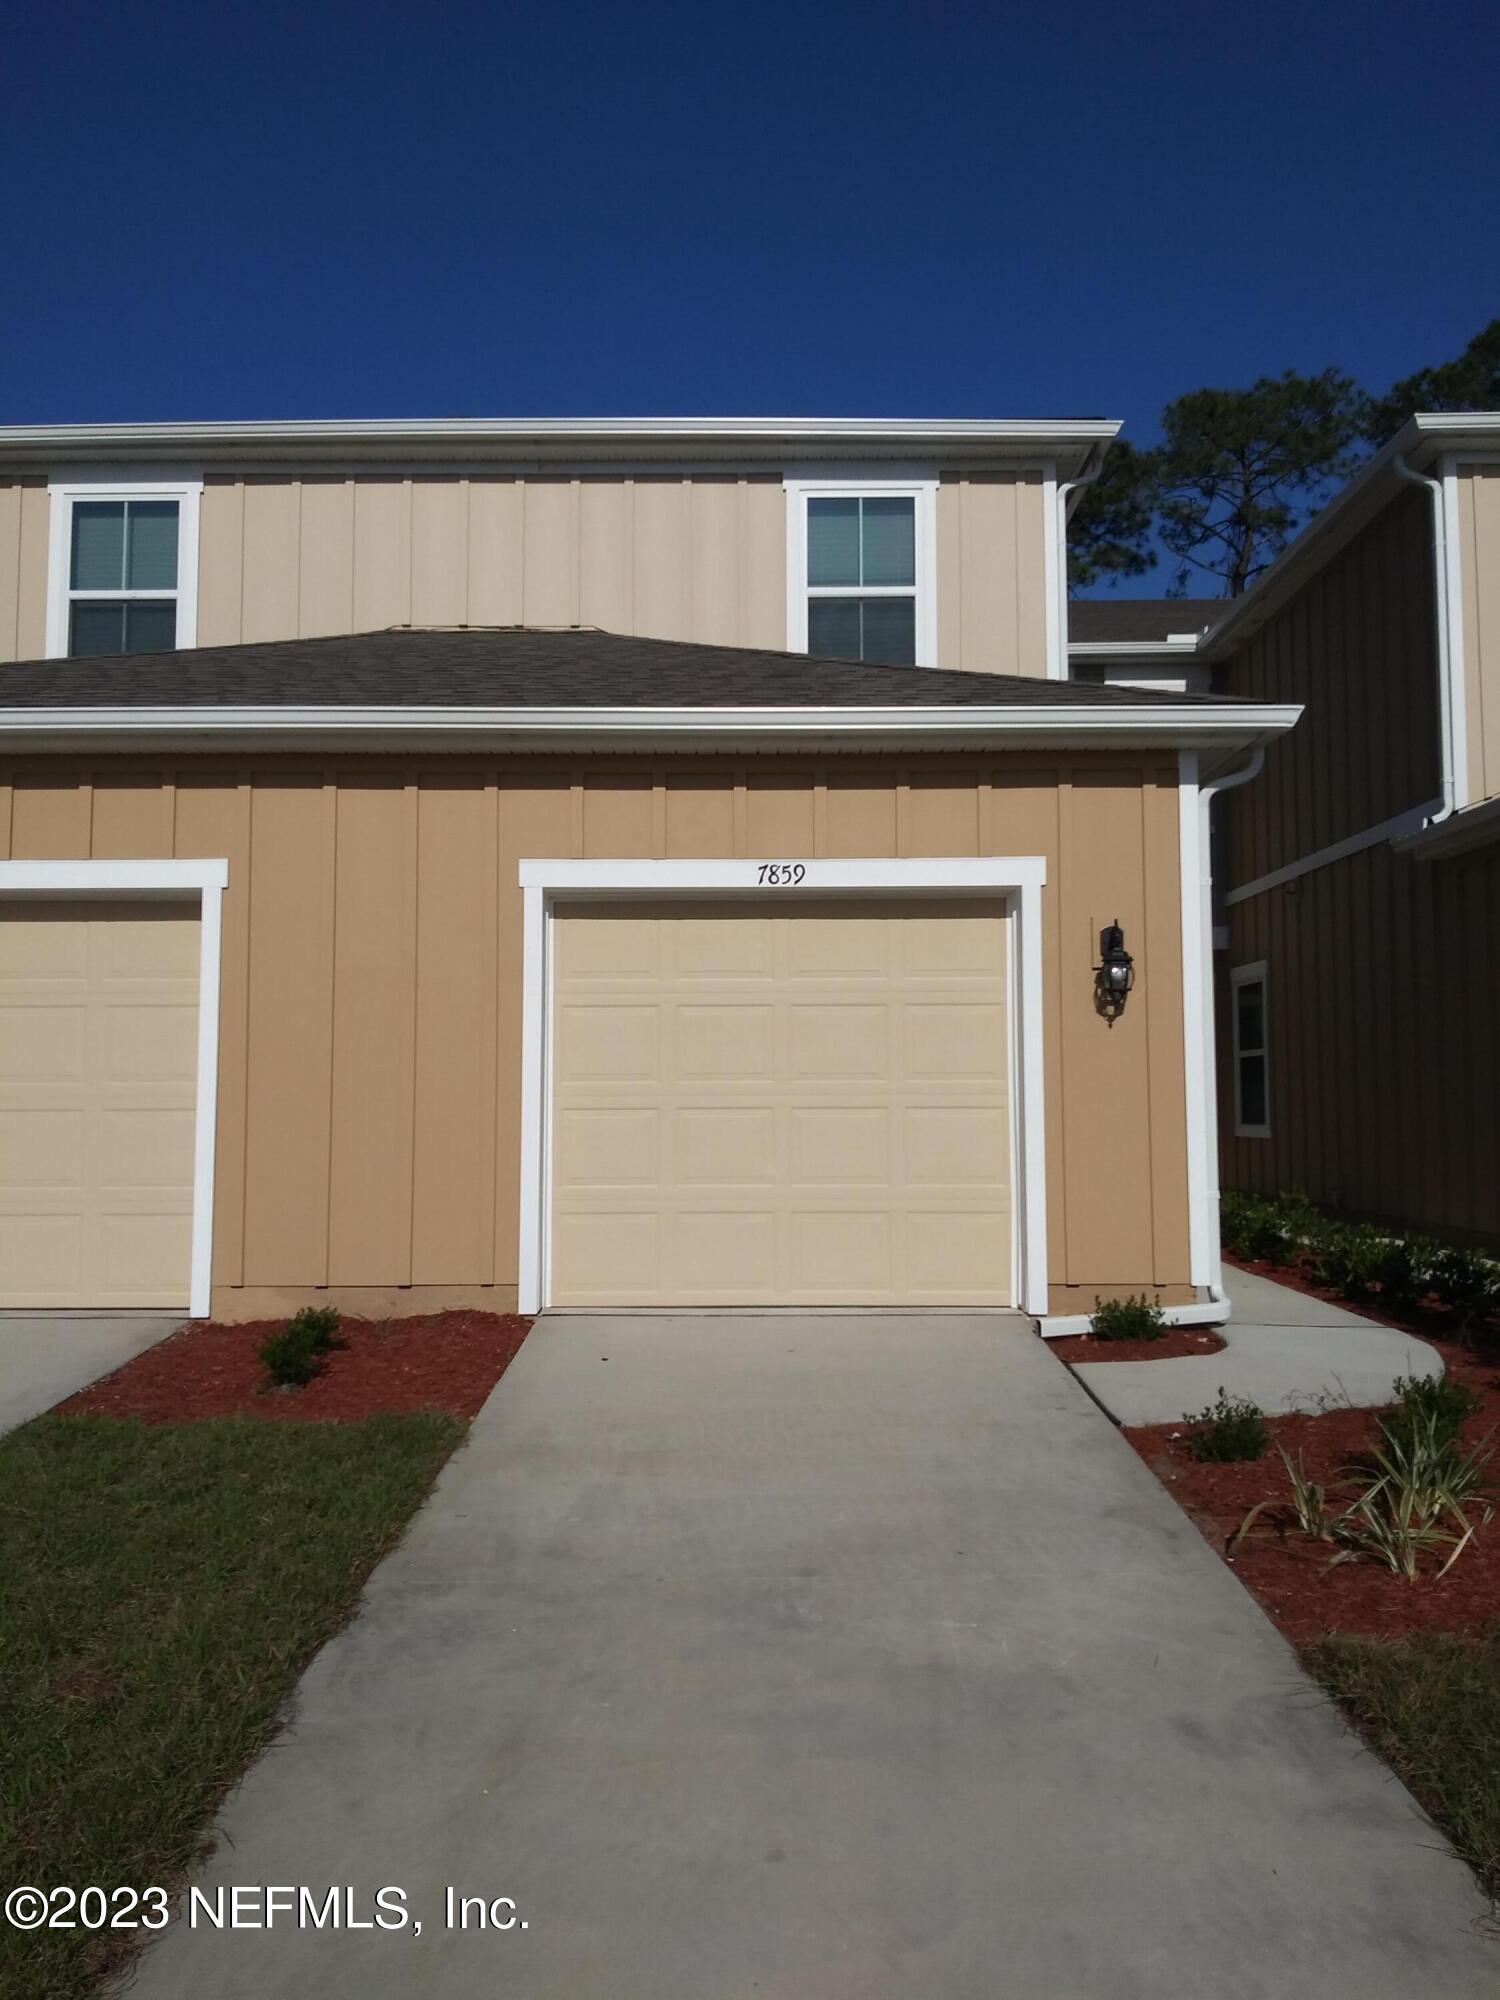 Jacksonville, FL home for sale located at 7859 Echo Springs Road, Jacksonville, FL 32256